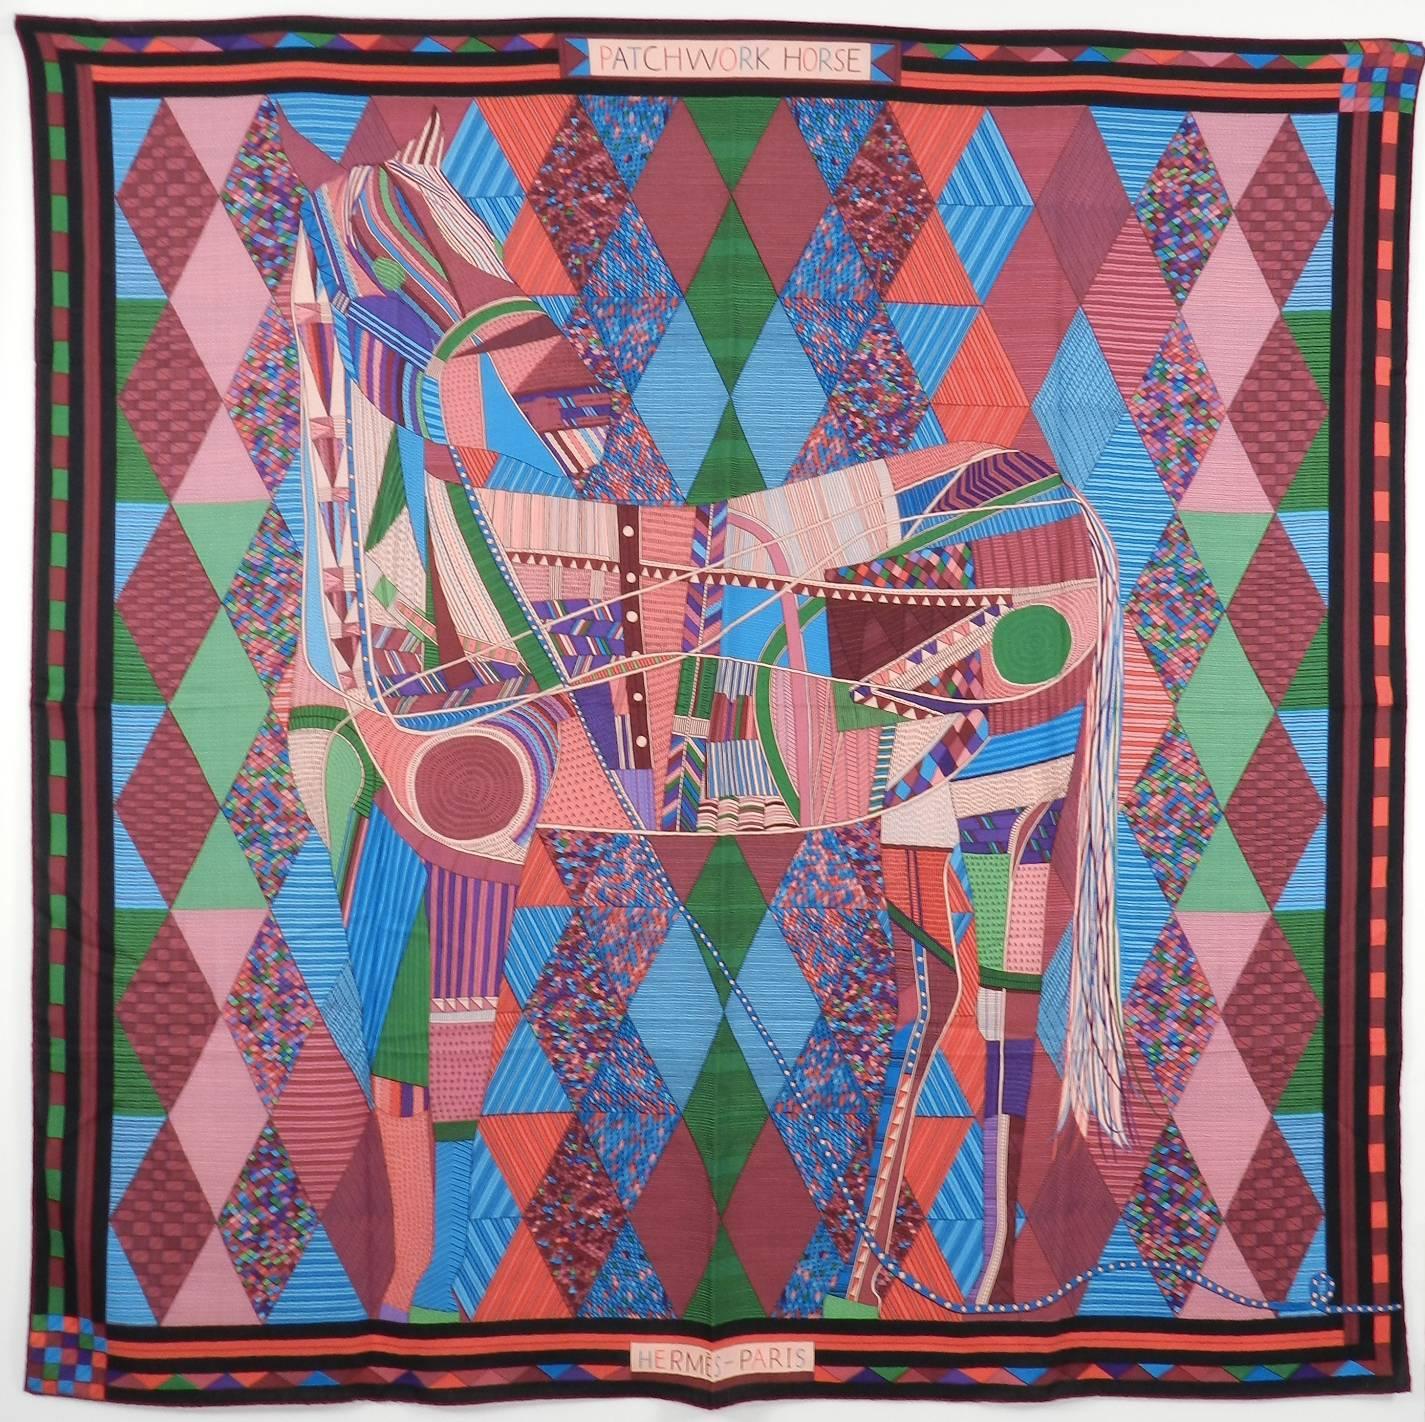 Hermes Patchwork Horse by Nigel Peake. Cashmere silk 140cm shawl scarf - Pink, blue, green, purple. Excellent pre-owned condition.  65% cashmere 35% silk blend. No box. 

We ship worldwide.